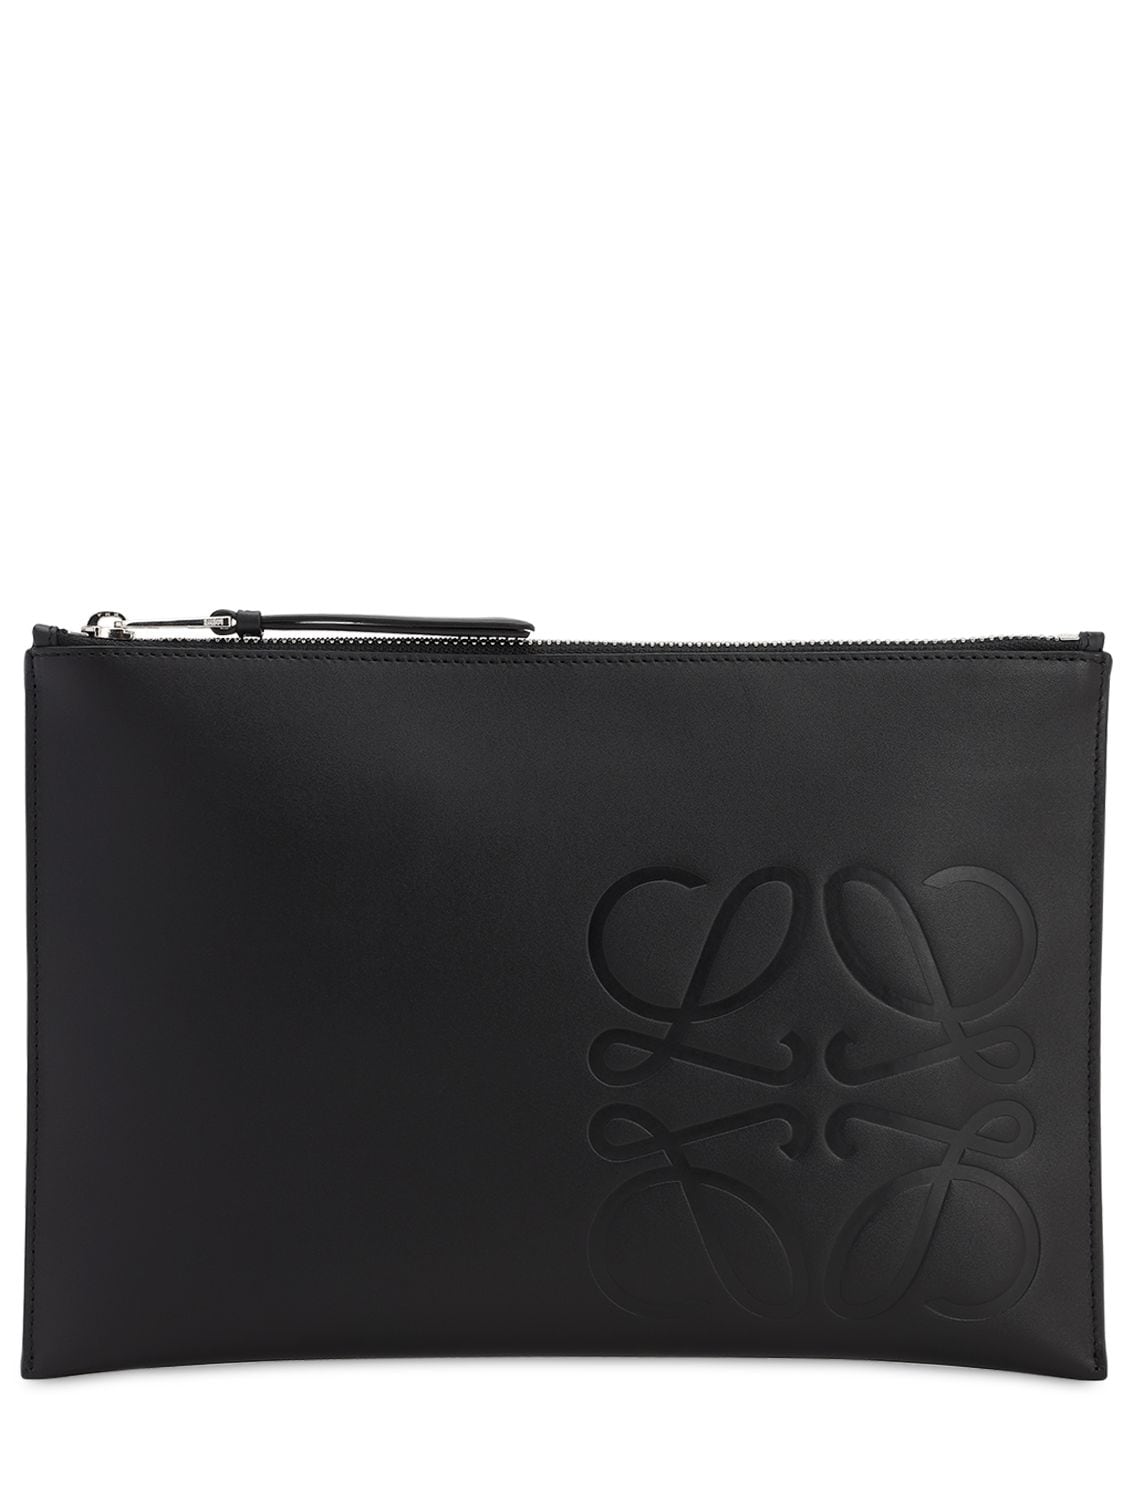 LOEWE SMOOTH LEATHER ANAGRAM POUCH,71I4PR005-MTEWMA2